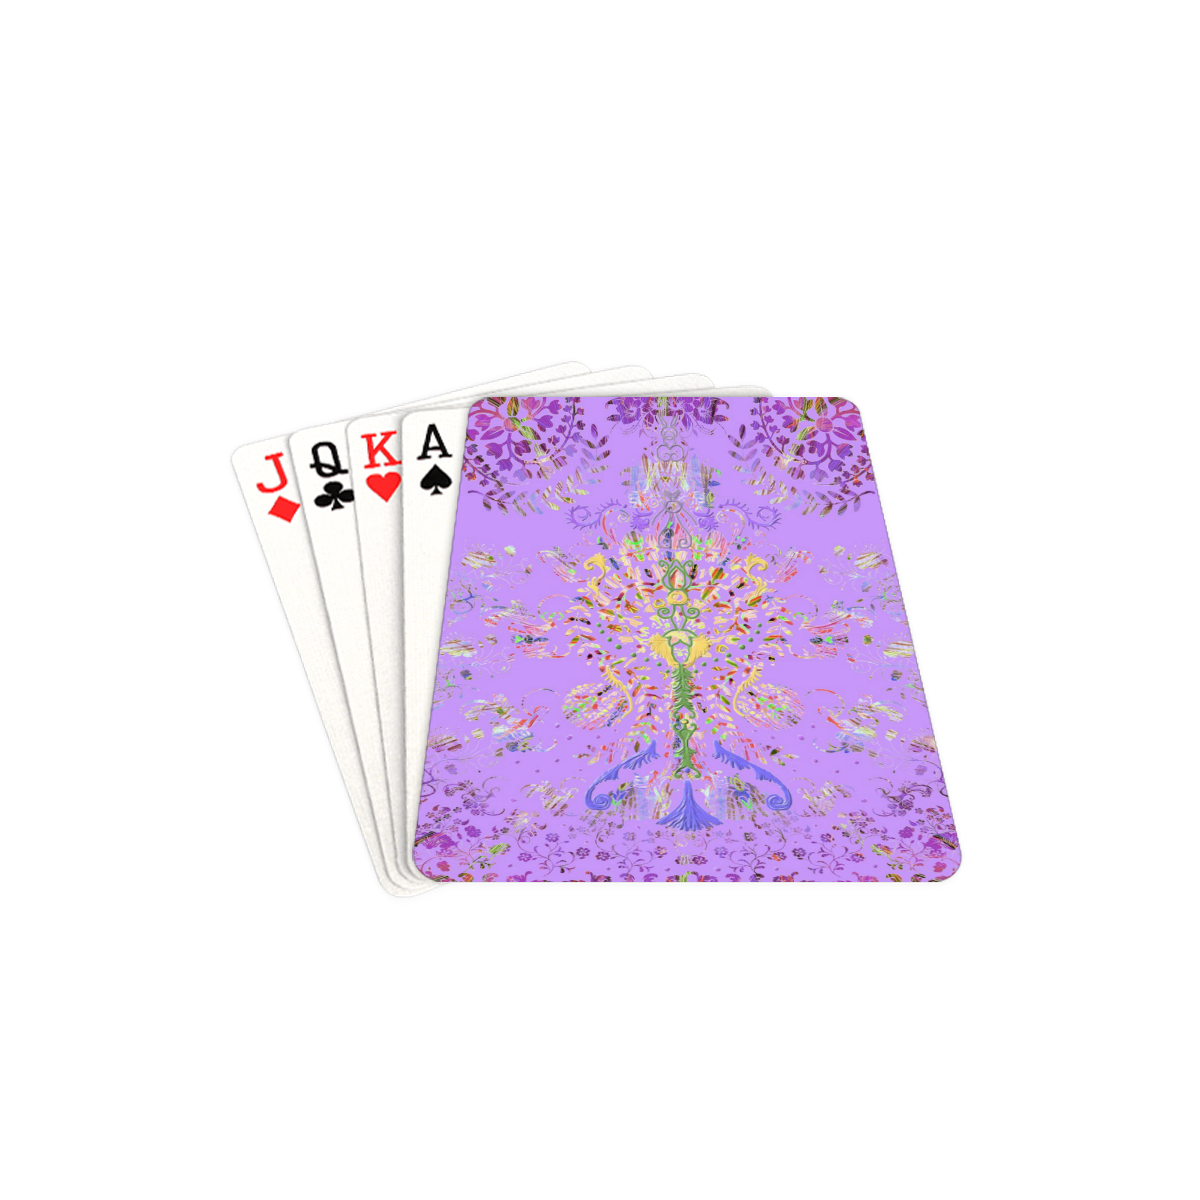 FRESCA 14 Playing Cards 2.5"x3.5"